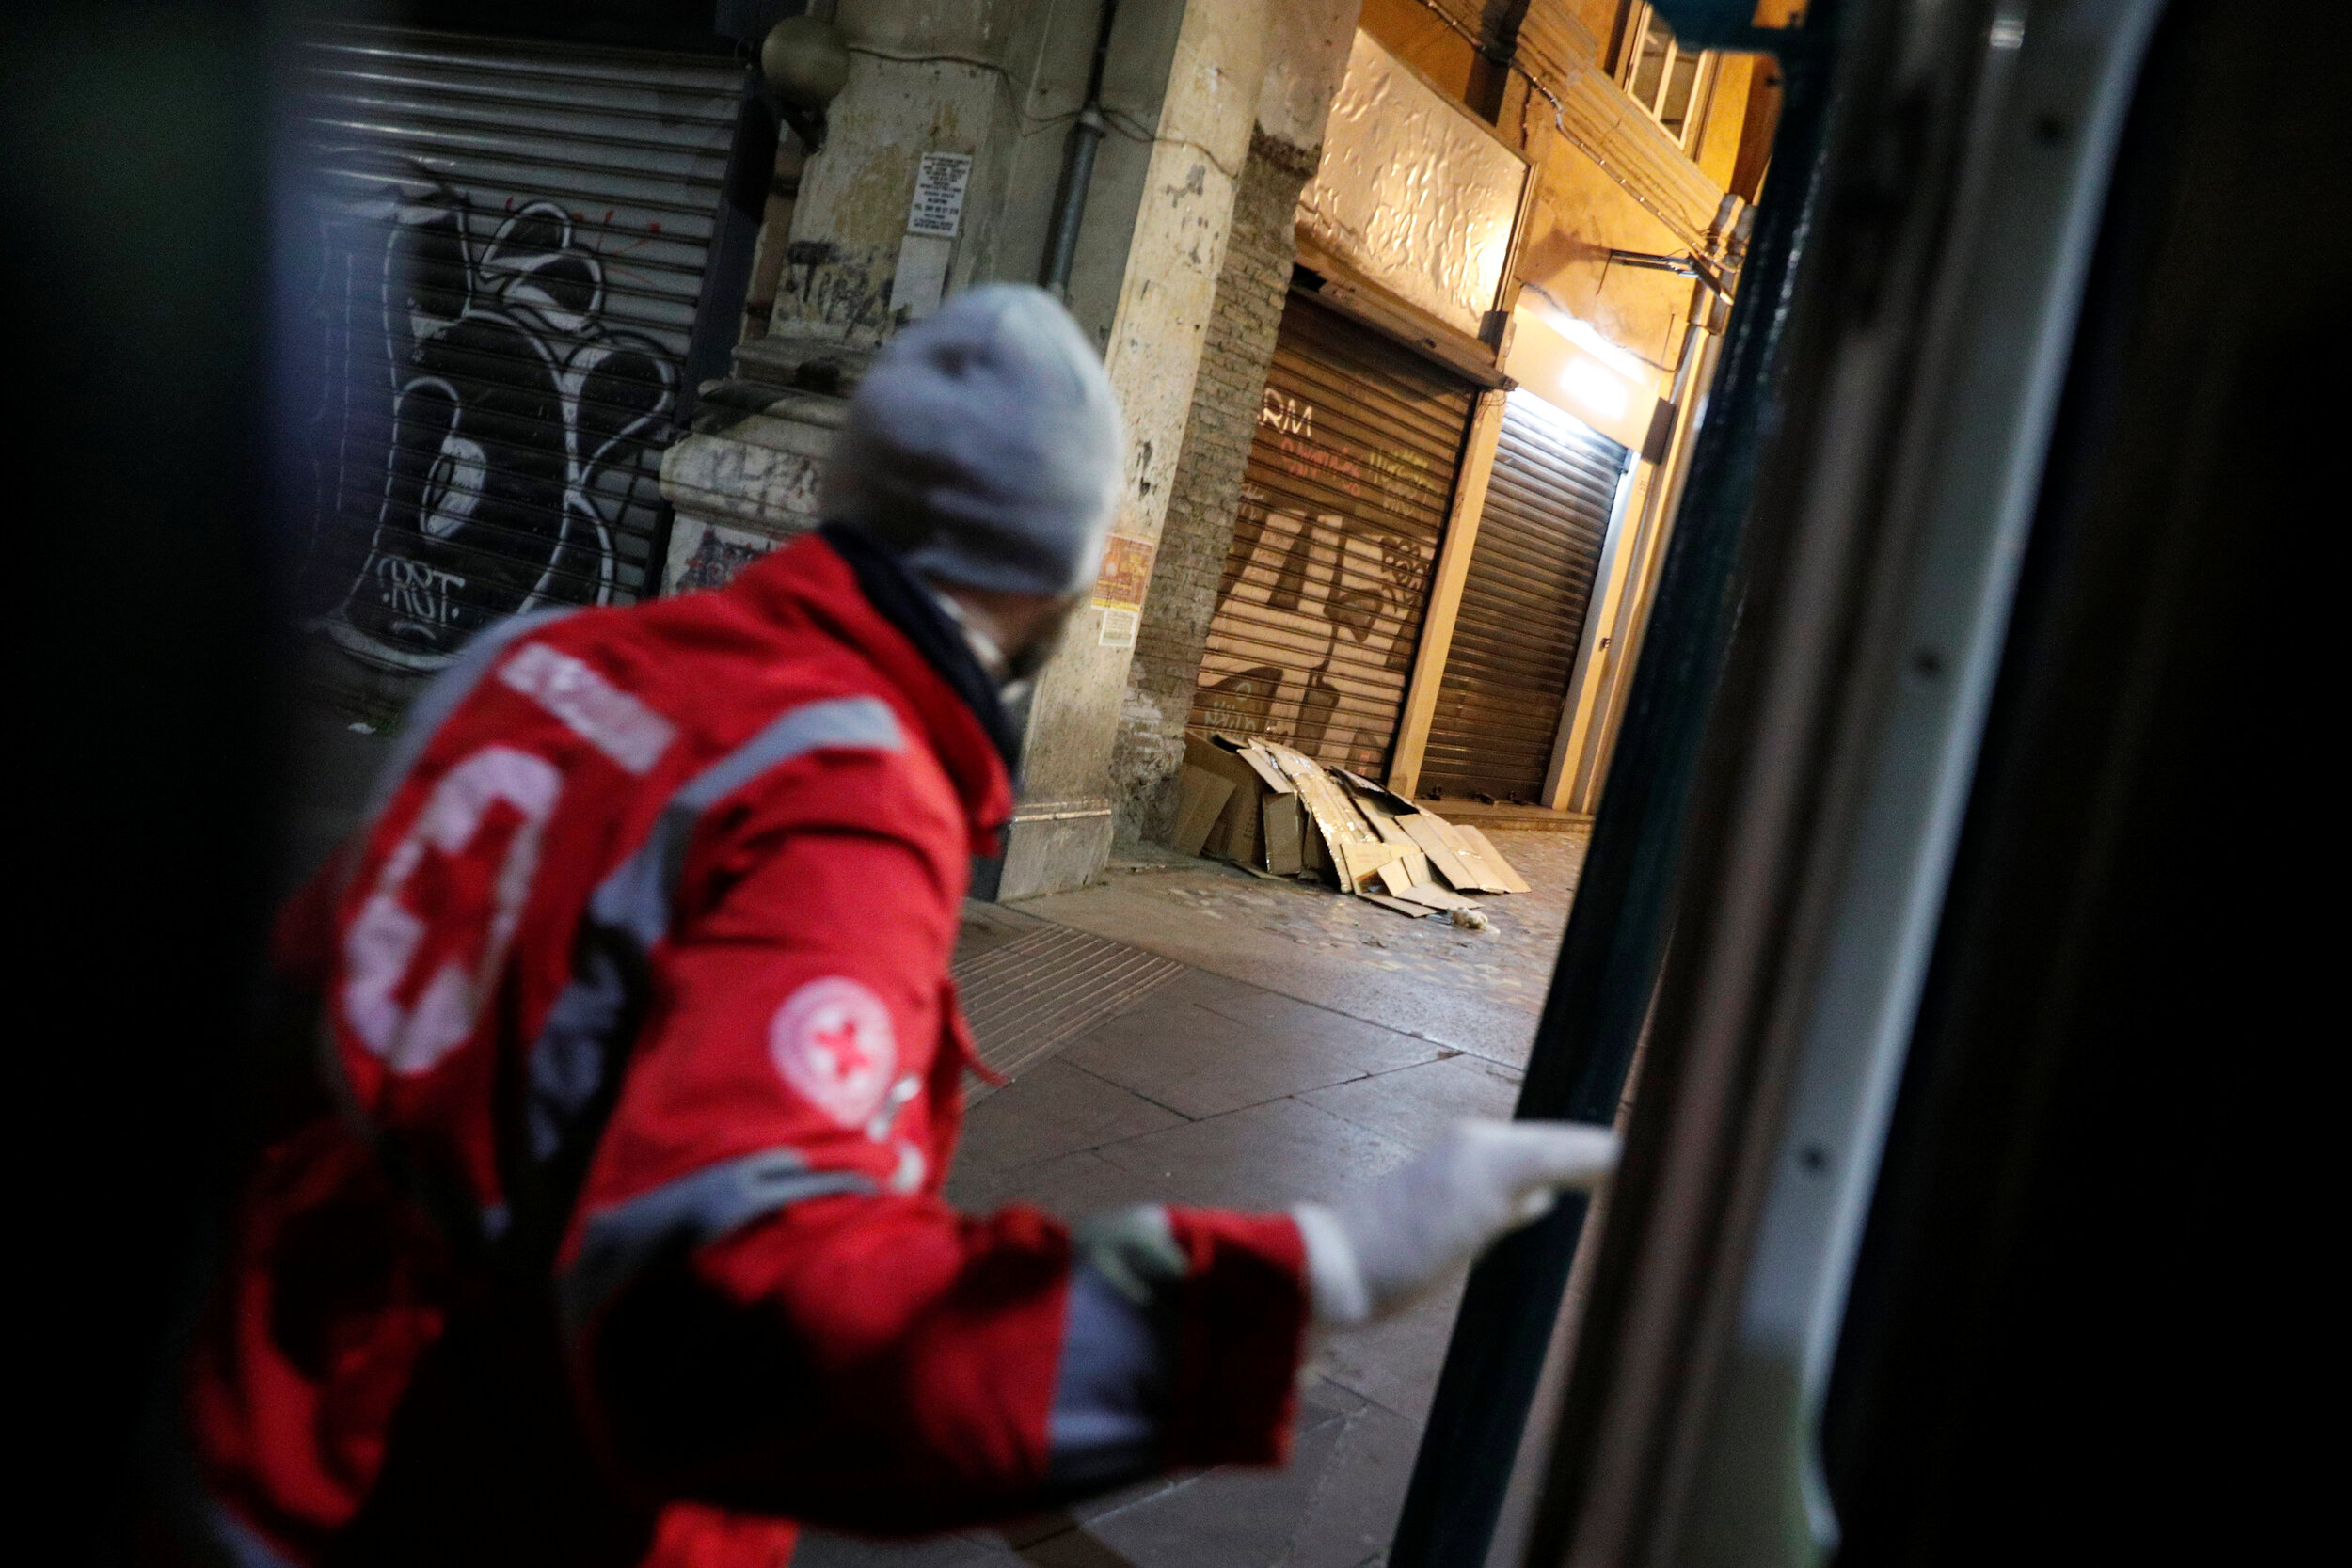  Red Cross worker Giorgio Vacirca, 43, gets out of a van after spotting a homeless person in Rome, Italy, March 17, 2020. Since the coronavirus crisis, Red Cross workers have been increasing their daily activities to meet the growing needs of the hom